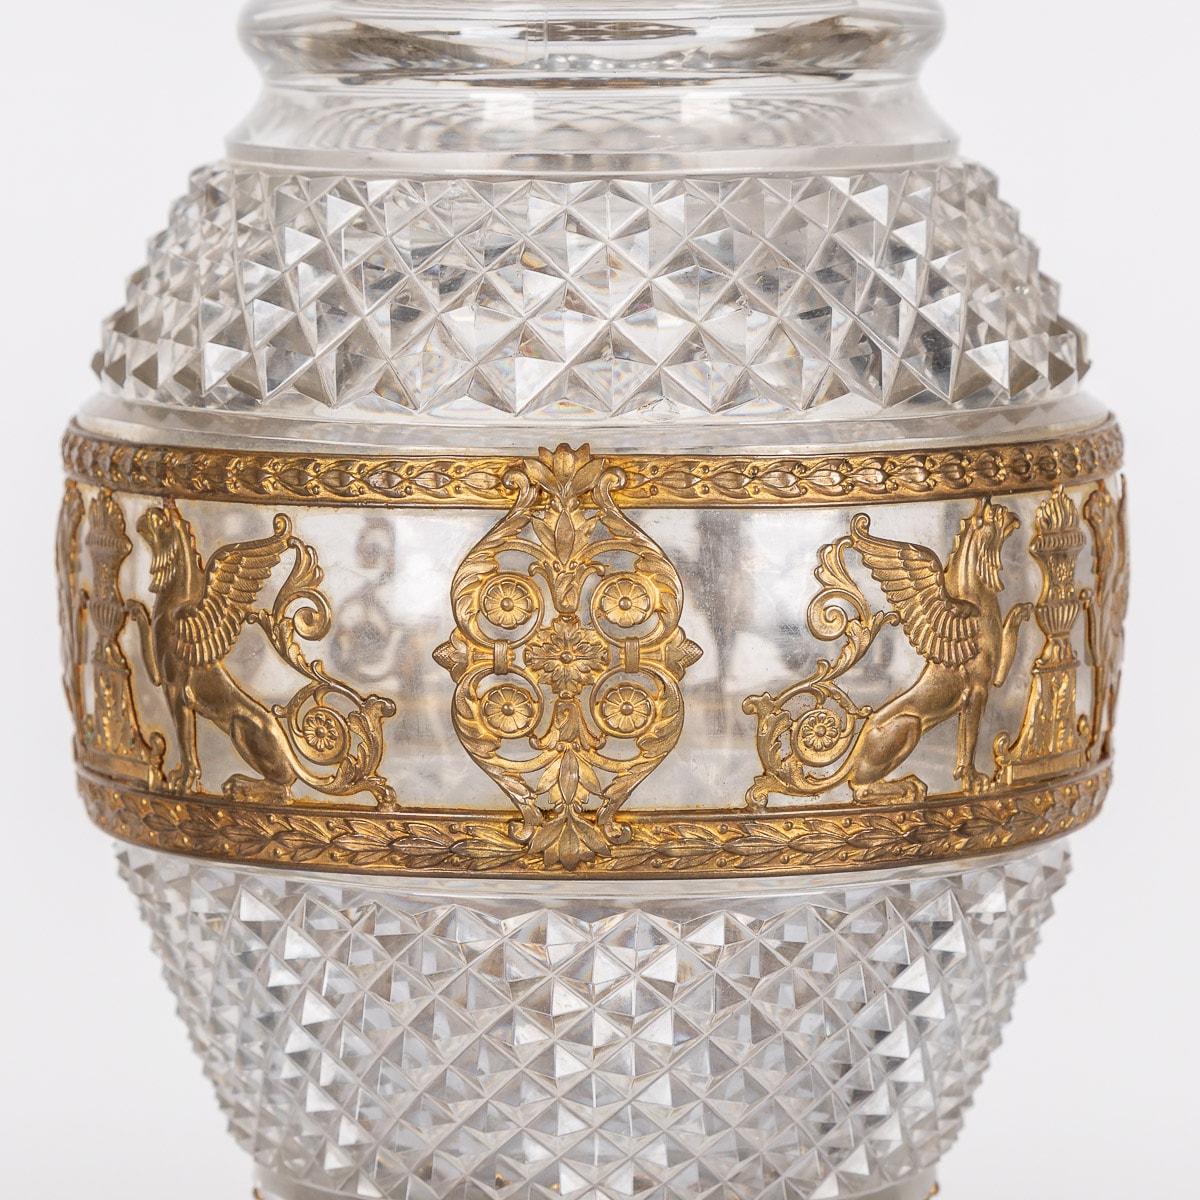 20th Century French Gold Plated & Baccarat Glass Vase, c.1900 For Sale 7